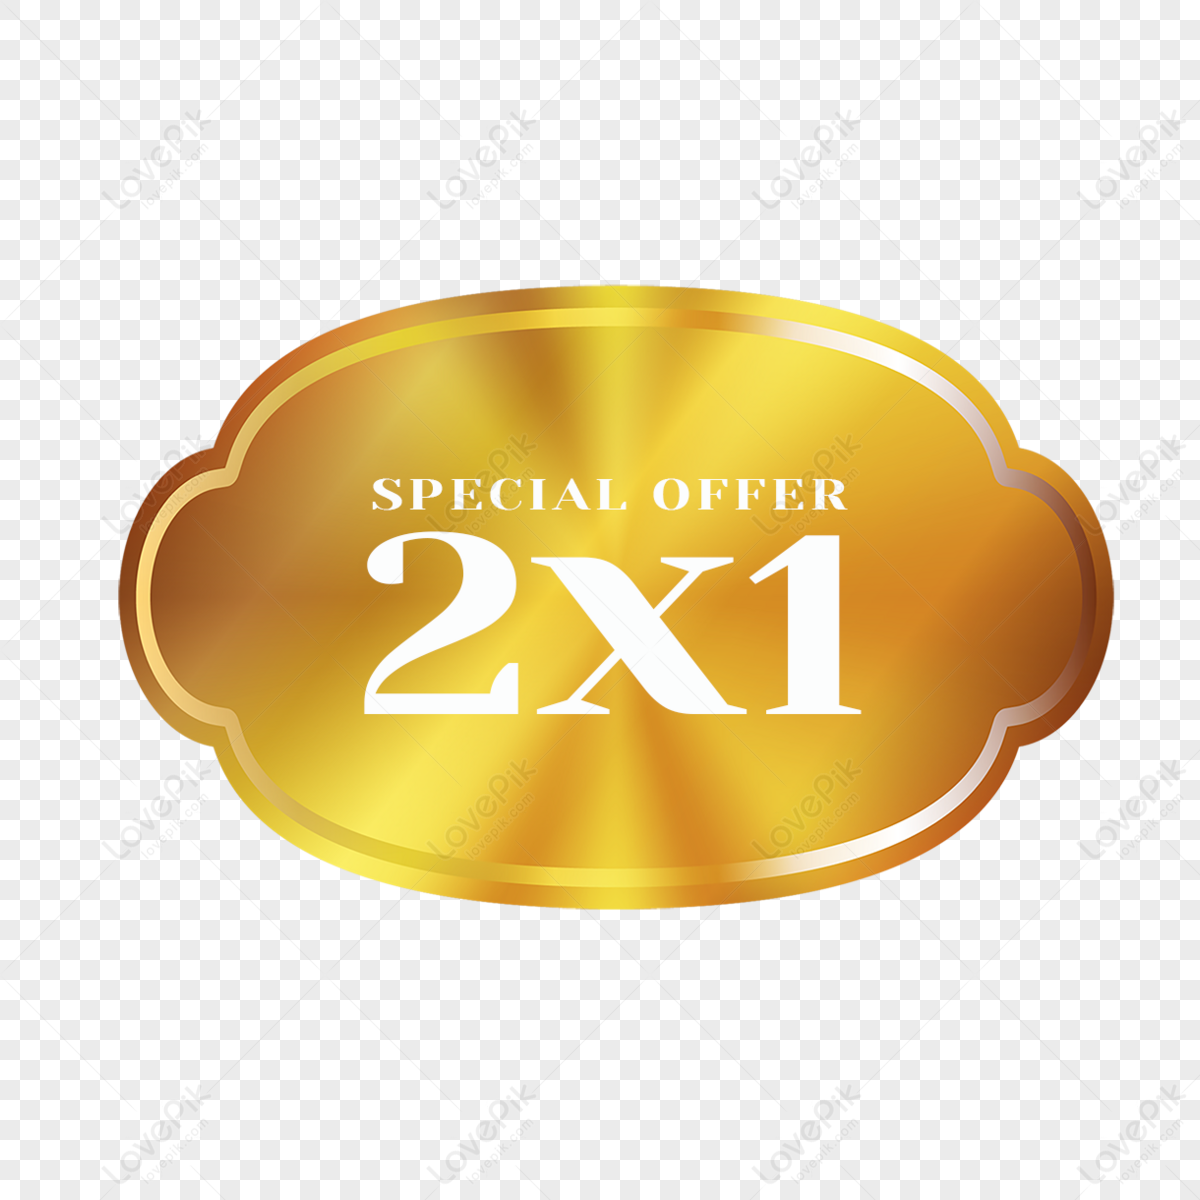 Special offer tezxt, Discounts and allowances Bed and breakfast Dentist  Business Sales, special offer, text, service, logo png | PNGWing